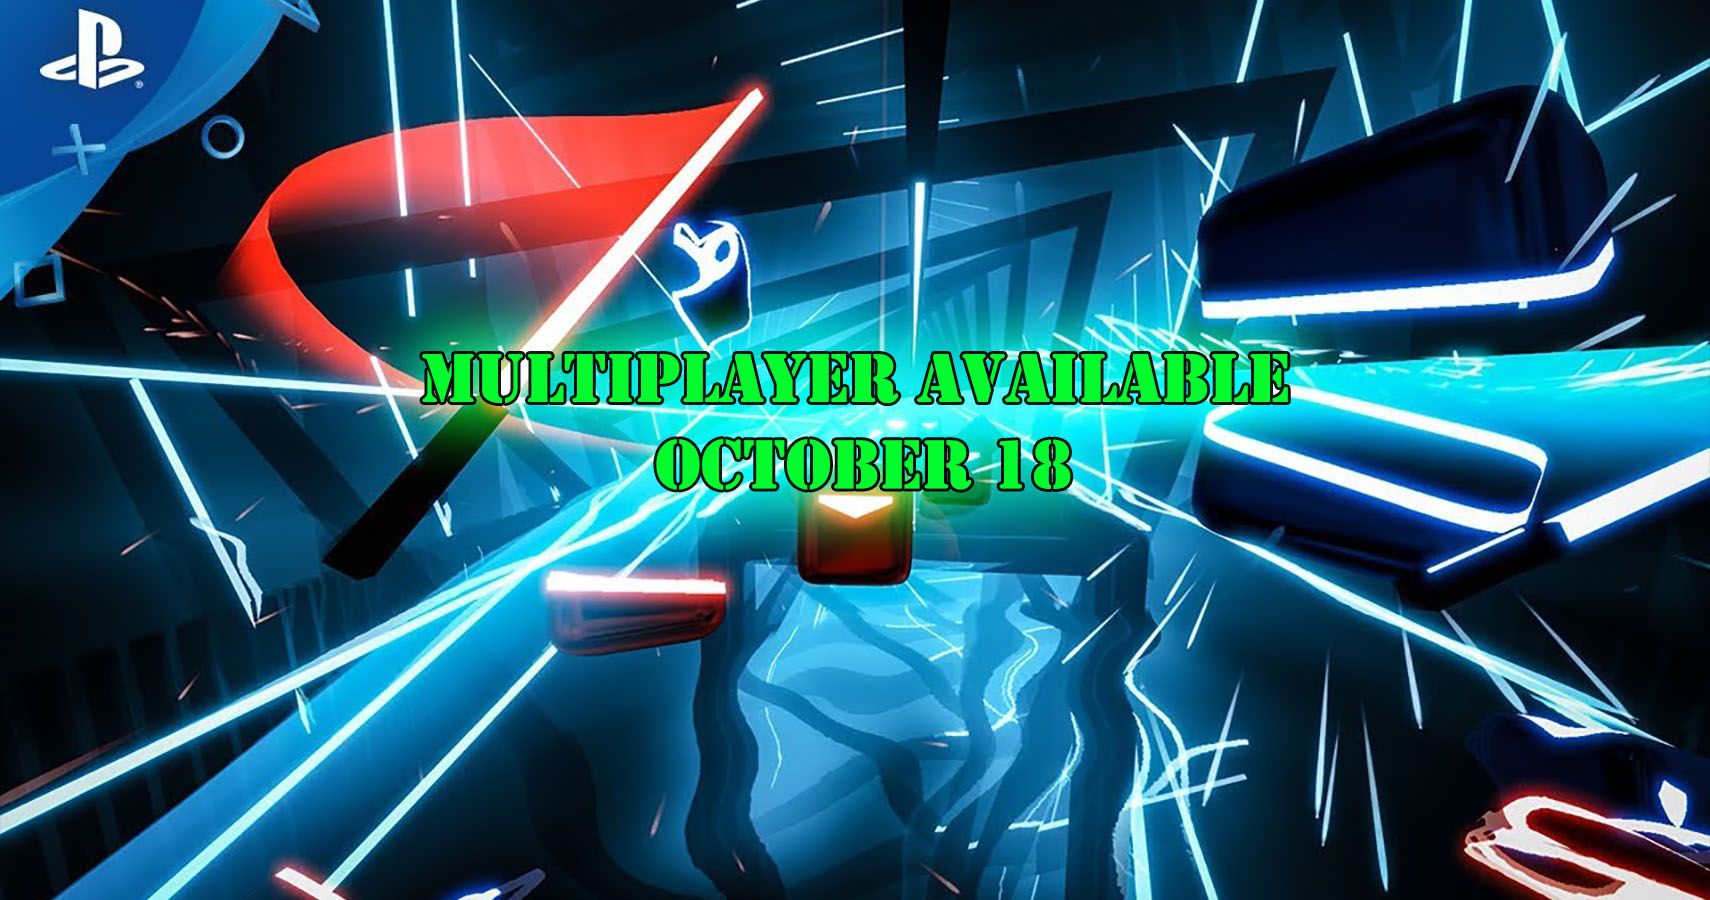 Beat Saber promotional graphic